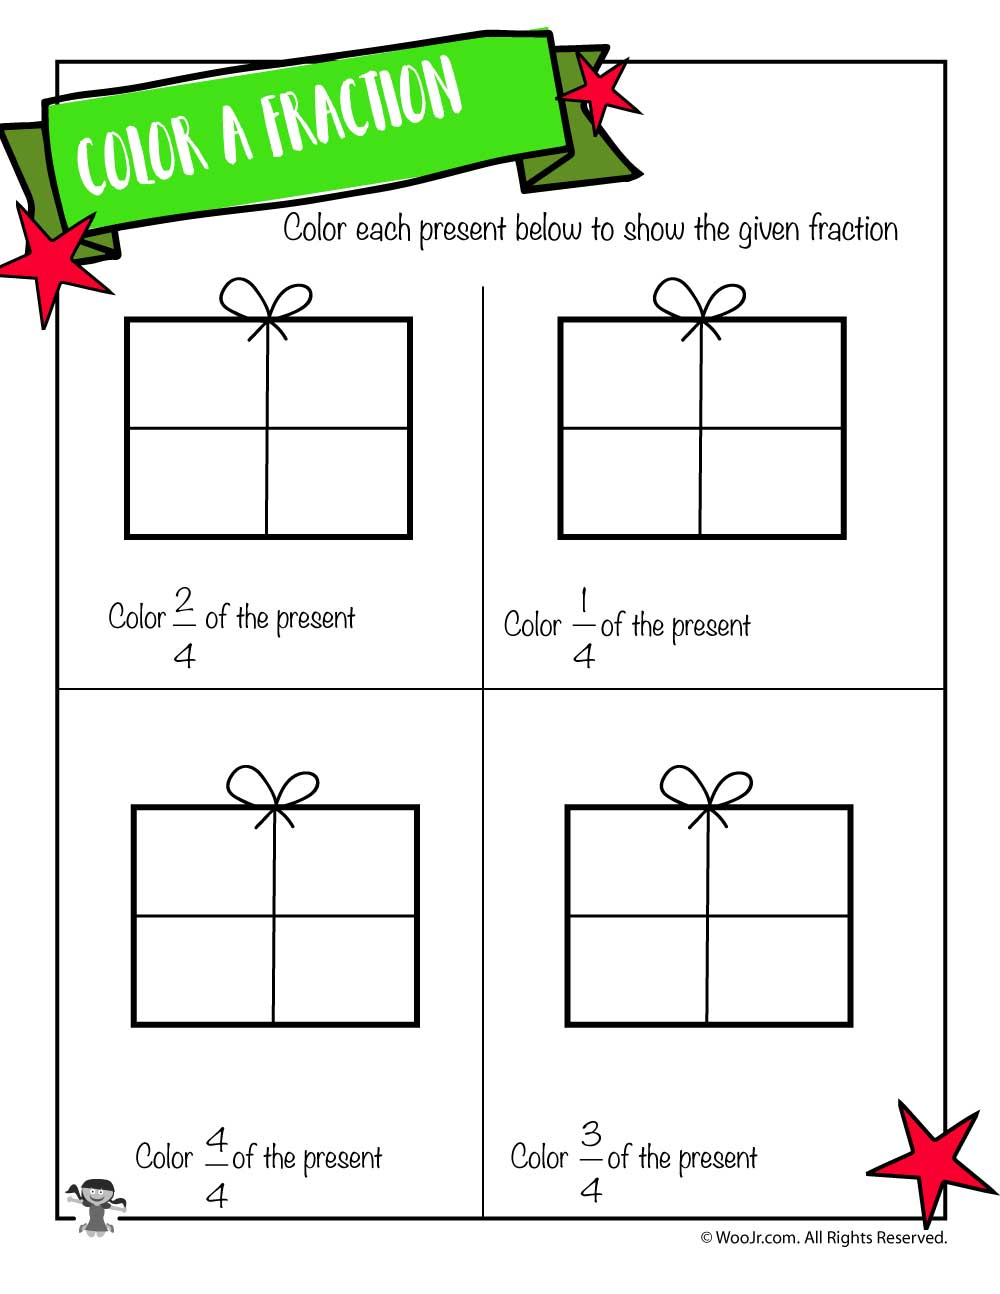 Color The Fraction Worksheet With Christmas Presents | Woo